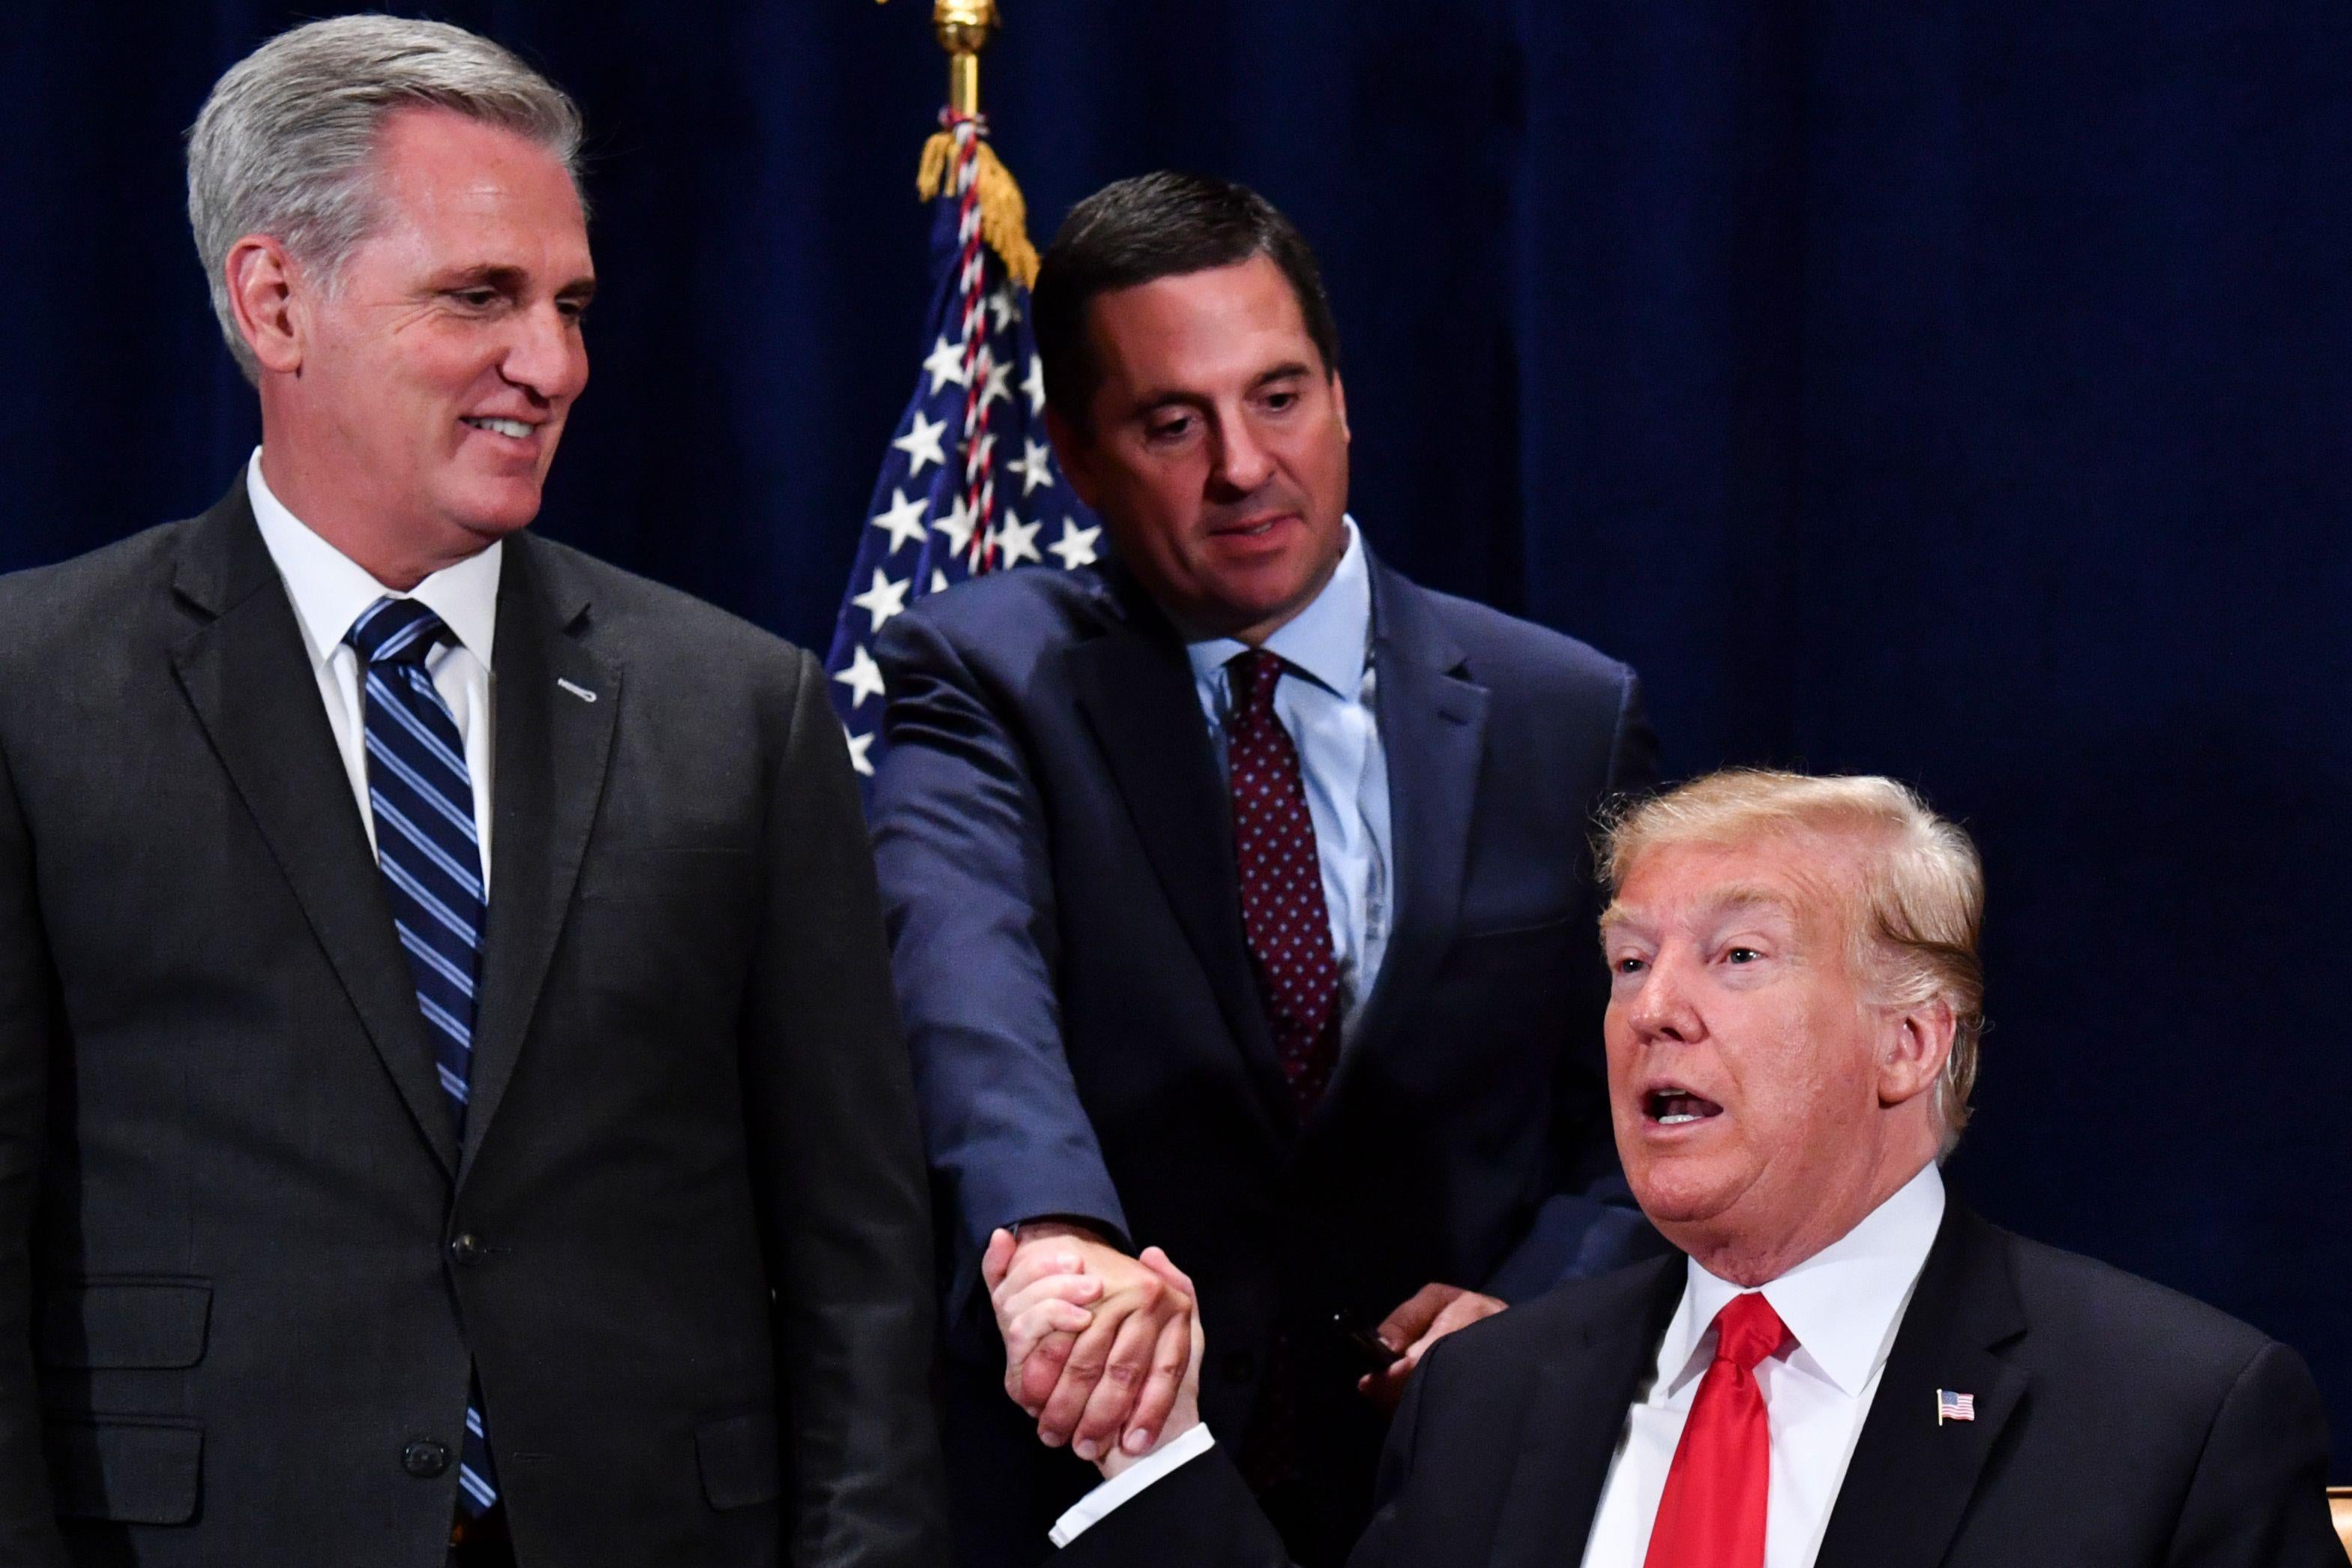 President Trump shakes hands with Rep. Devin Nunes as then-House Majority Leader Kevin McCarthy looks on Oct. 19, 2018.